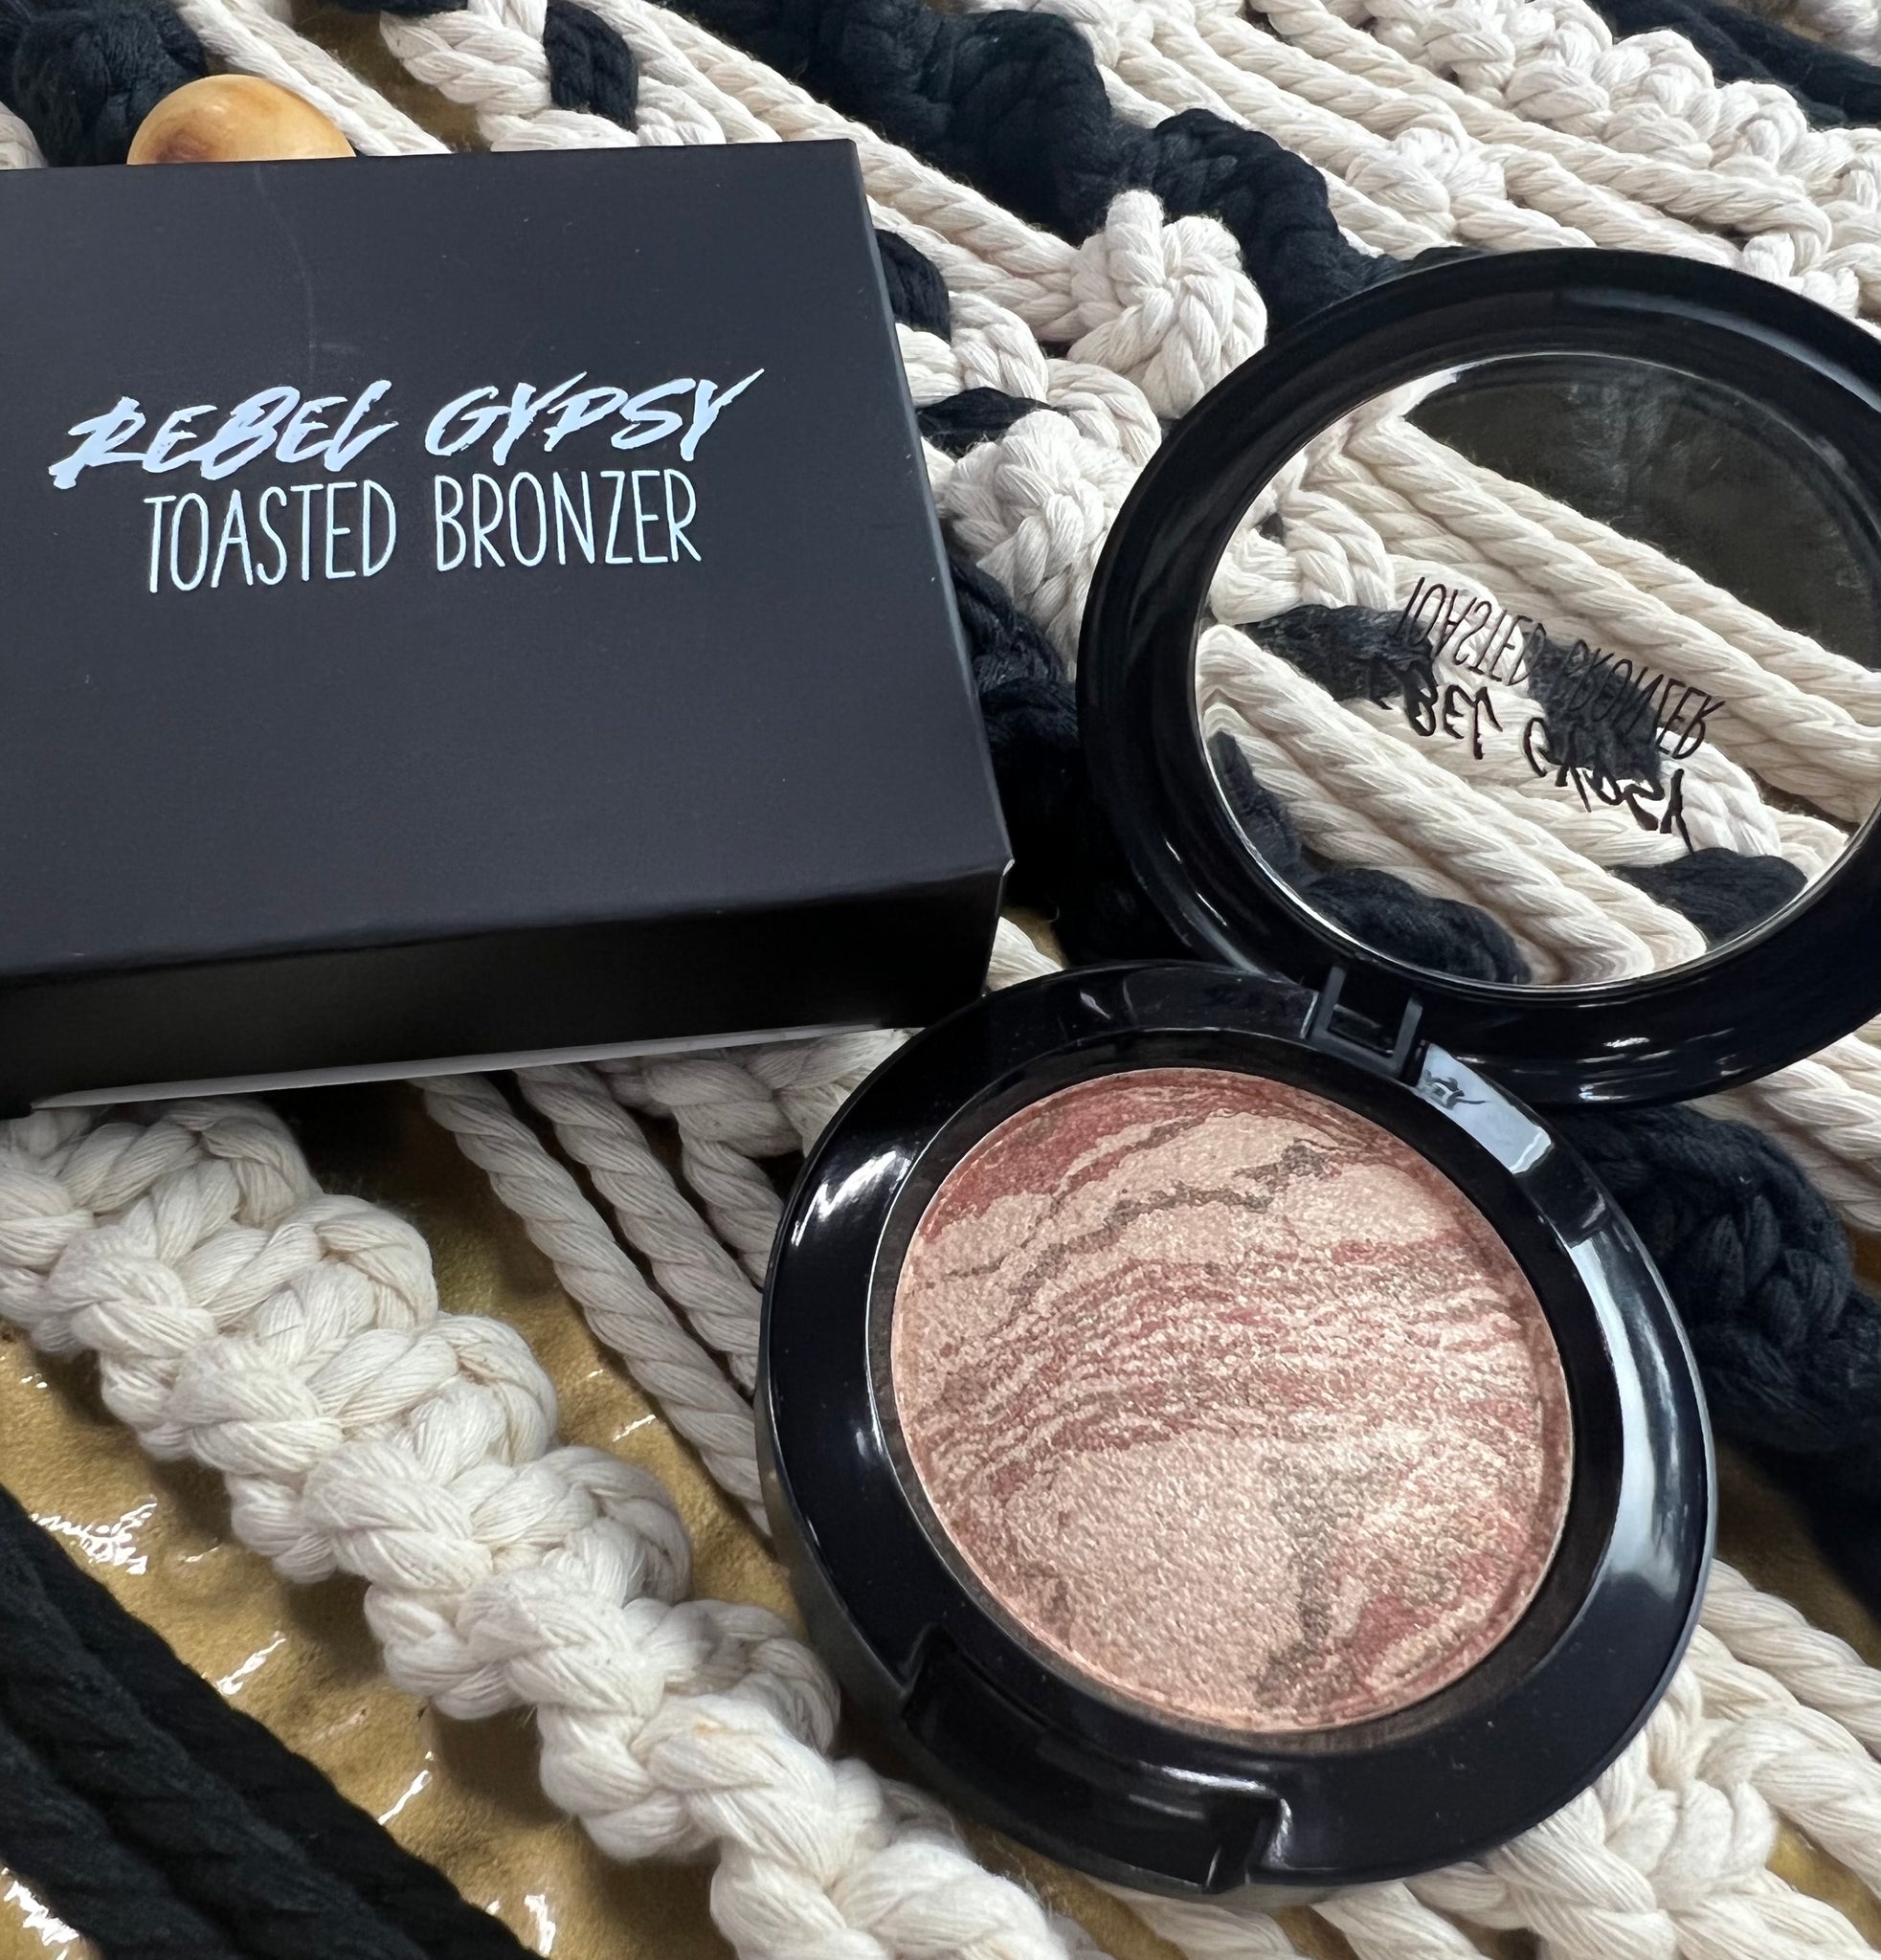 Rebel Gypsy Toasted Bronzer